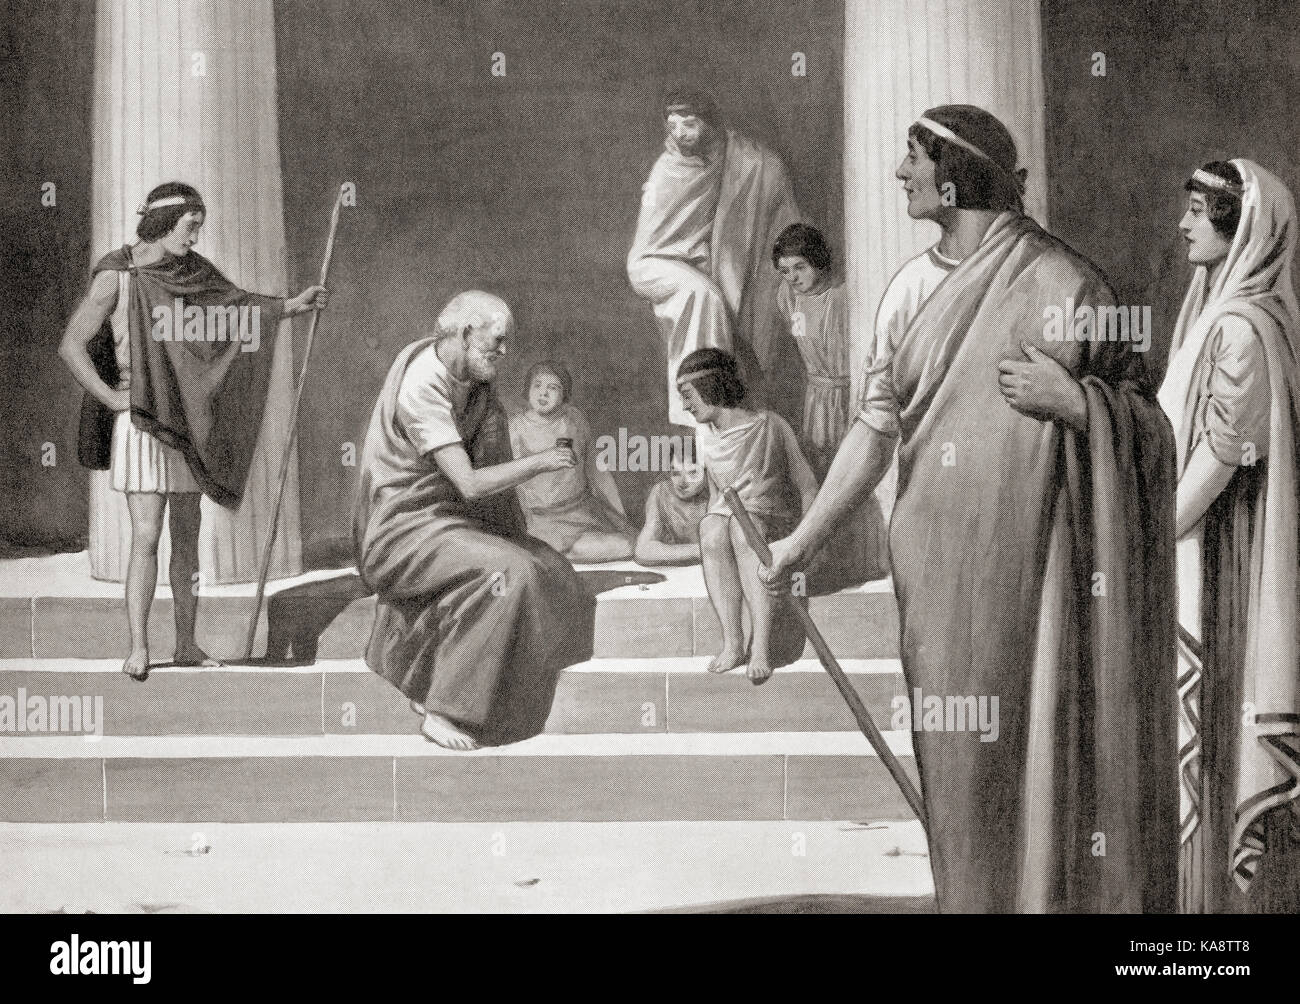 Heraclitus playing at dice with boys in order to show his contempt for the usual occupations of men.  Heraclitus of Ephesus, c. 535 – c. 475 BC.  Pre-Socratic Greek philosopher.  From Hutchinson's History of the Nations, published 1915. Stock Photo